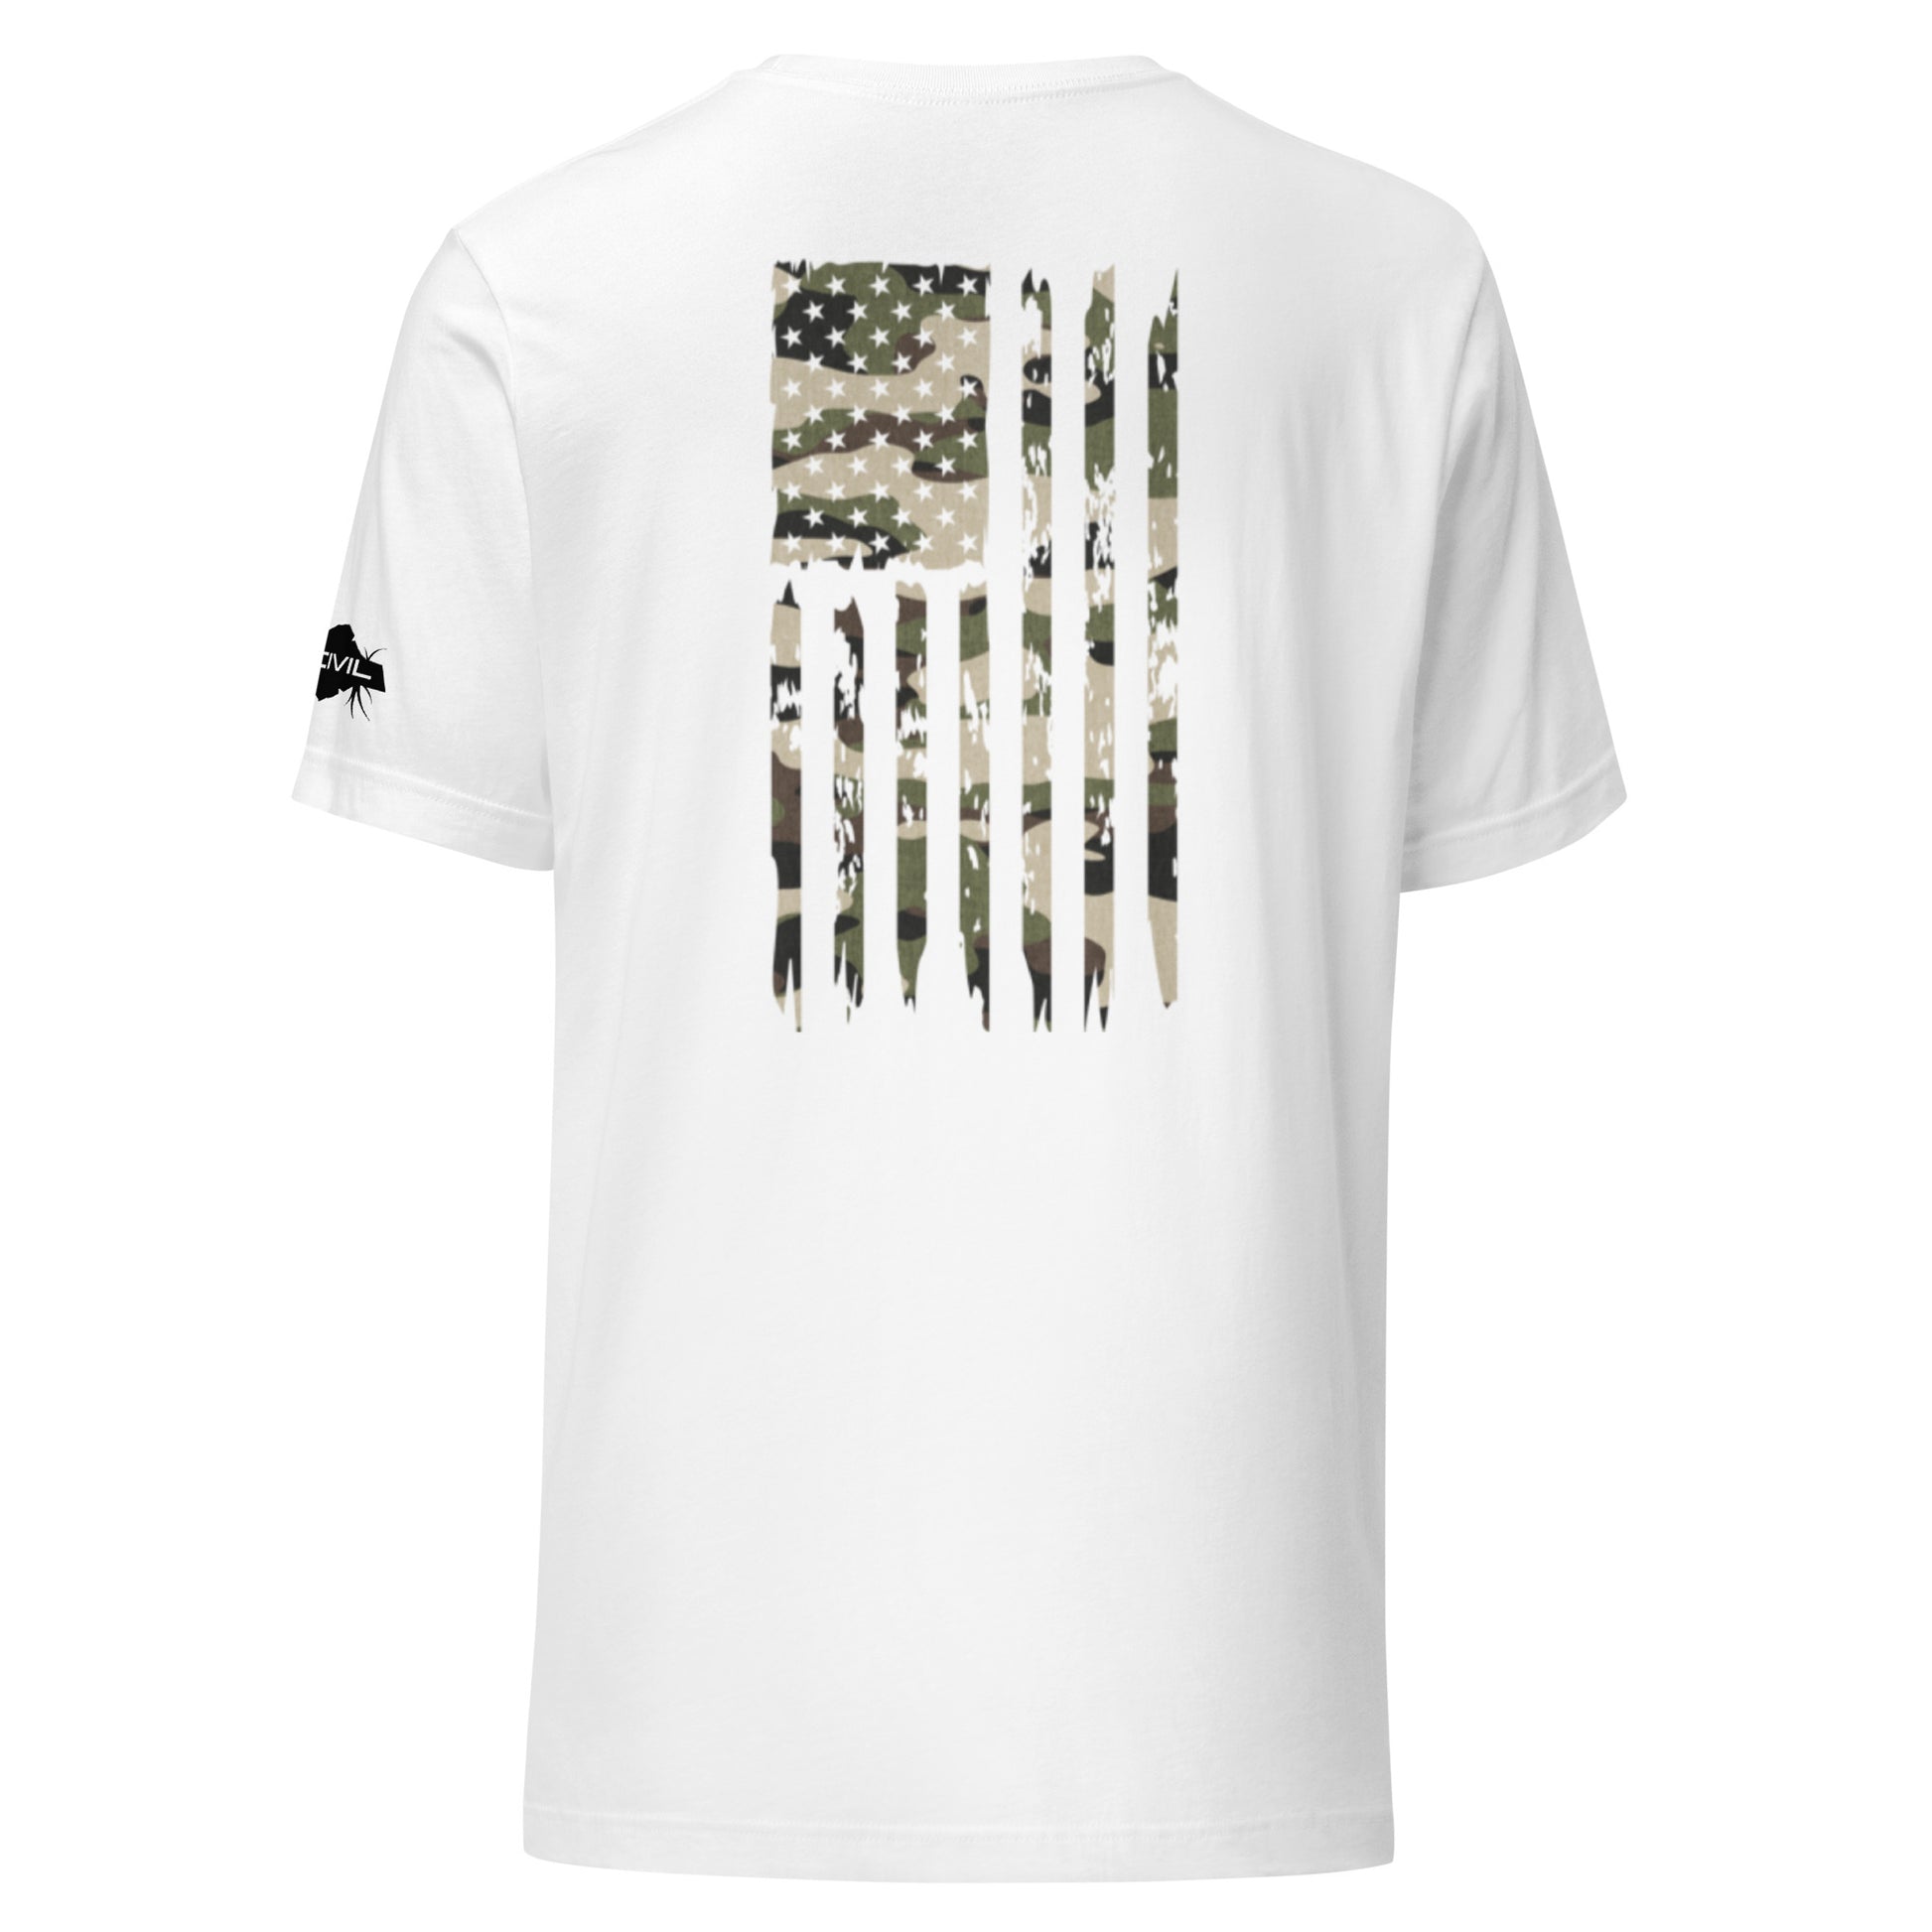 Unisex White Camo army distressed American Flag t-shirt